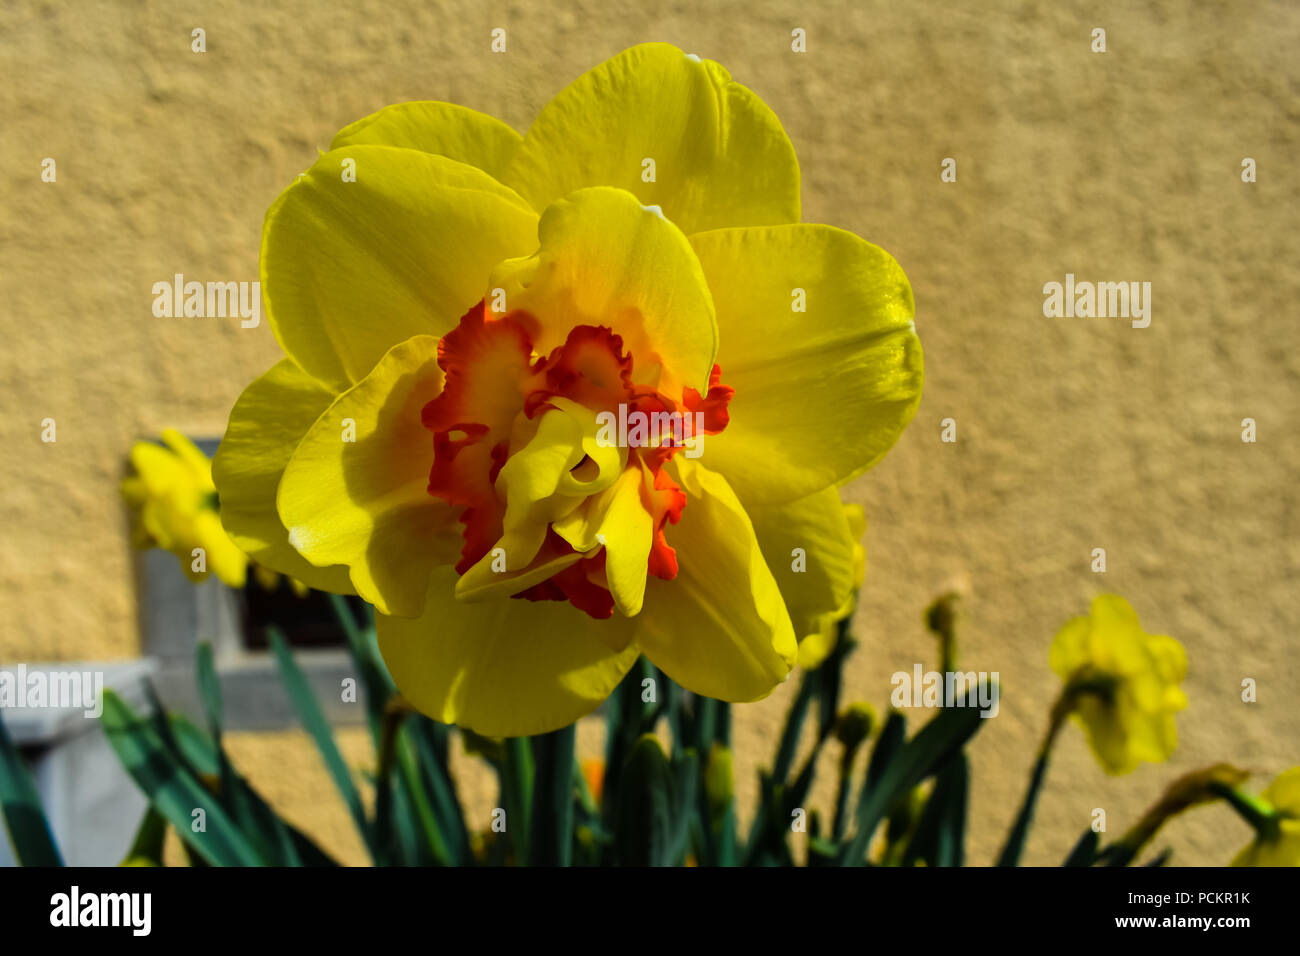 Narcissus is a genus of predominantly spring perennial plants of the Amaryllidaceae (amaryllis) family. Stock Photo